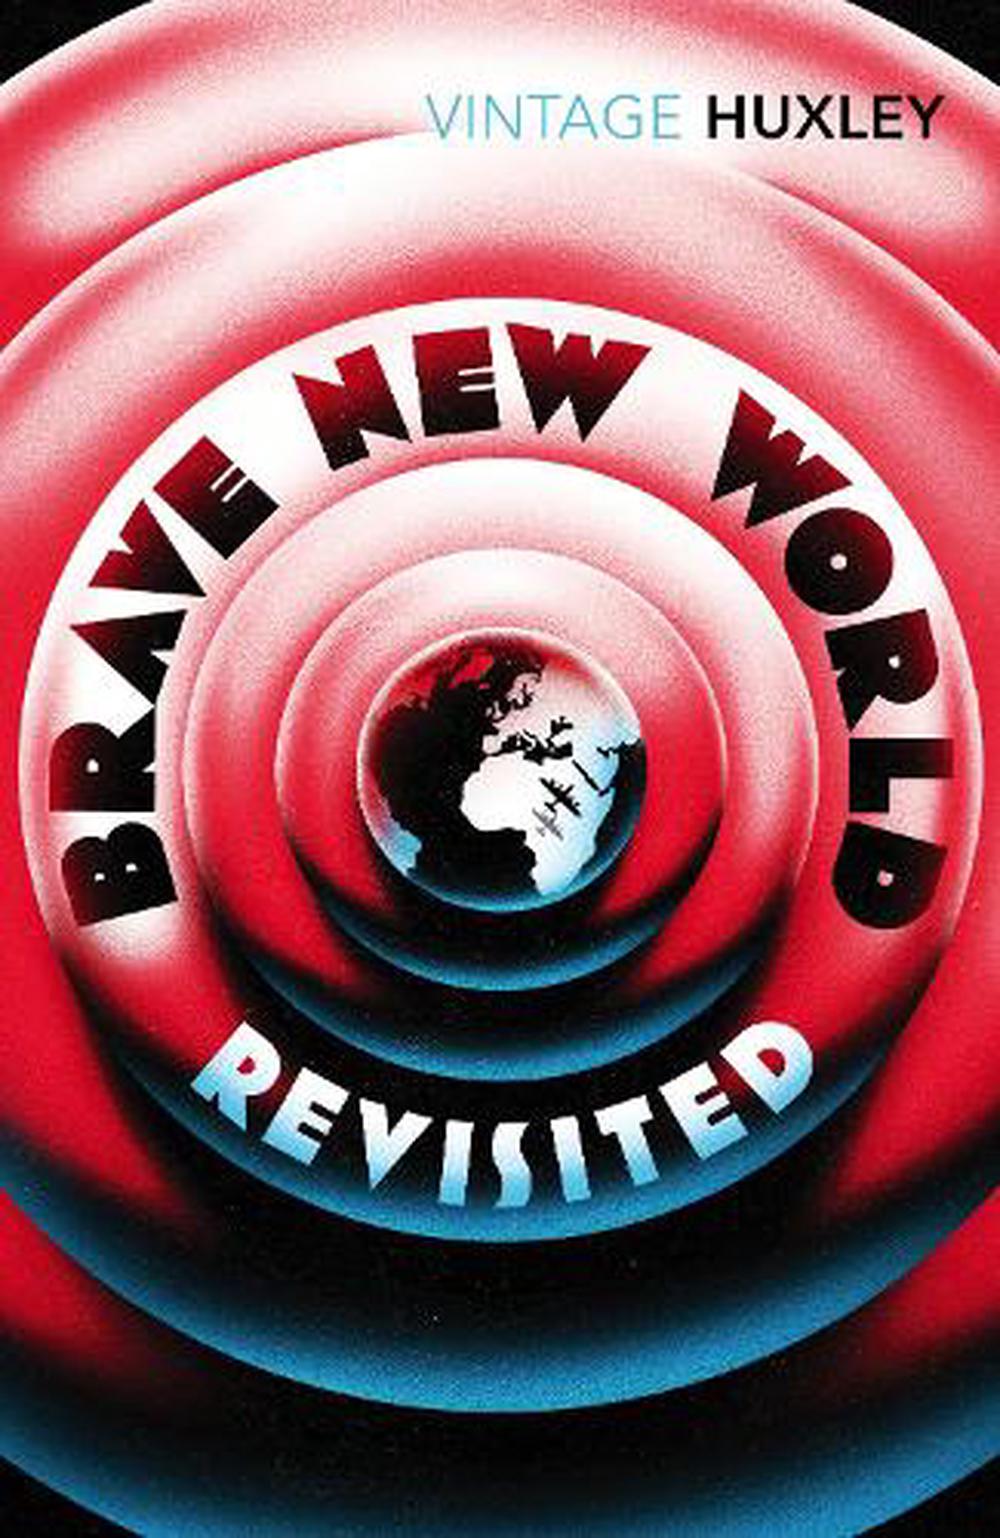 huxley brave new world revisited